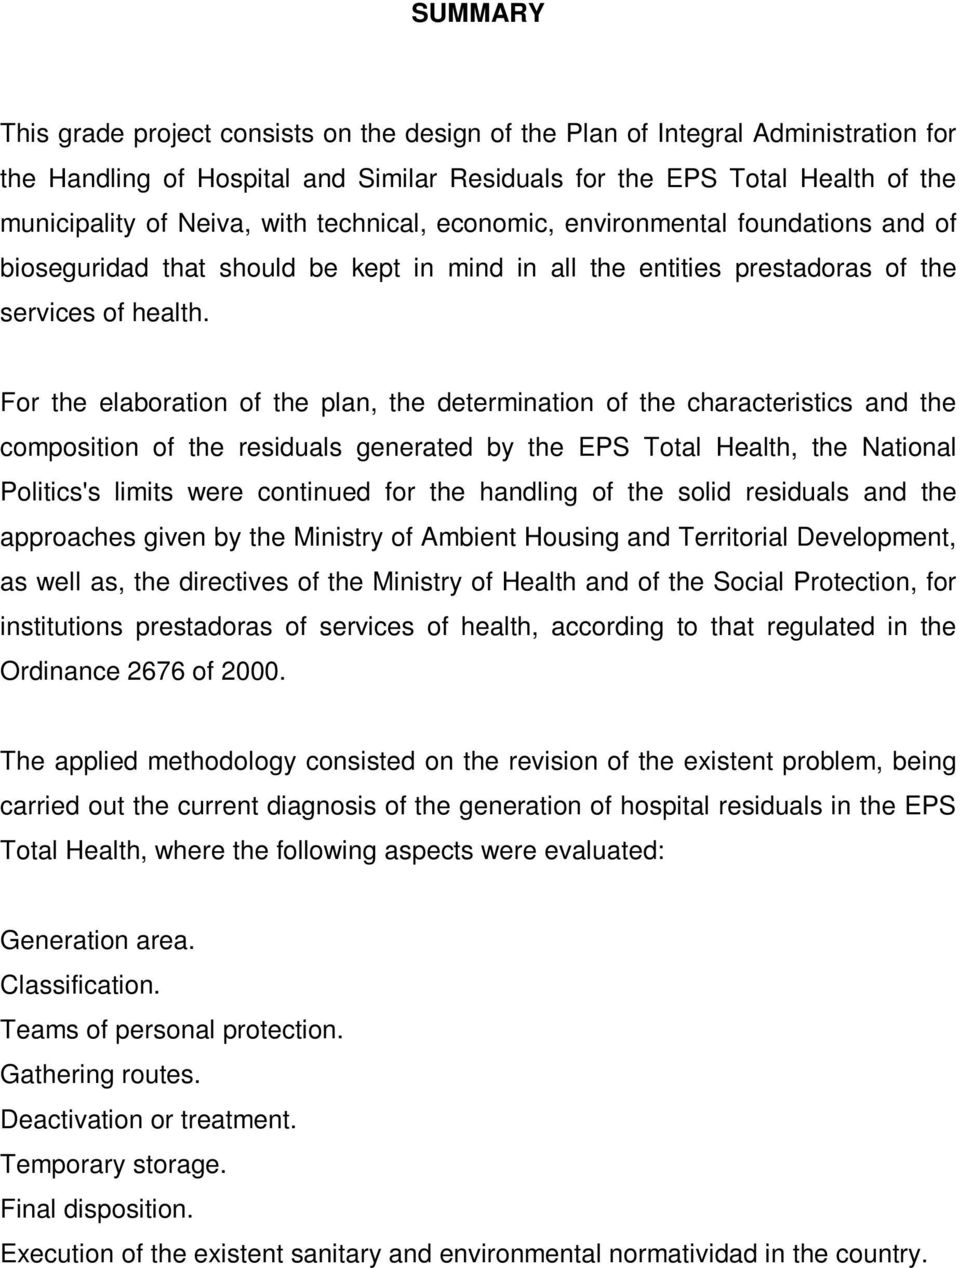 For the elaboration of the plan, the determination of the characteristics and the composition of the residuals generated by the EPS Total Health, the National Politics's limits were continued for the